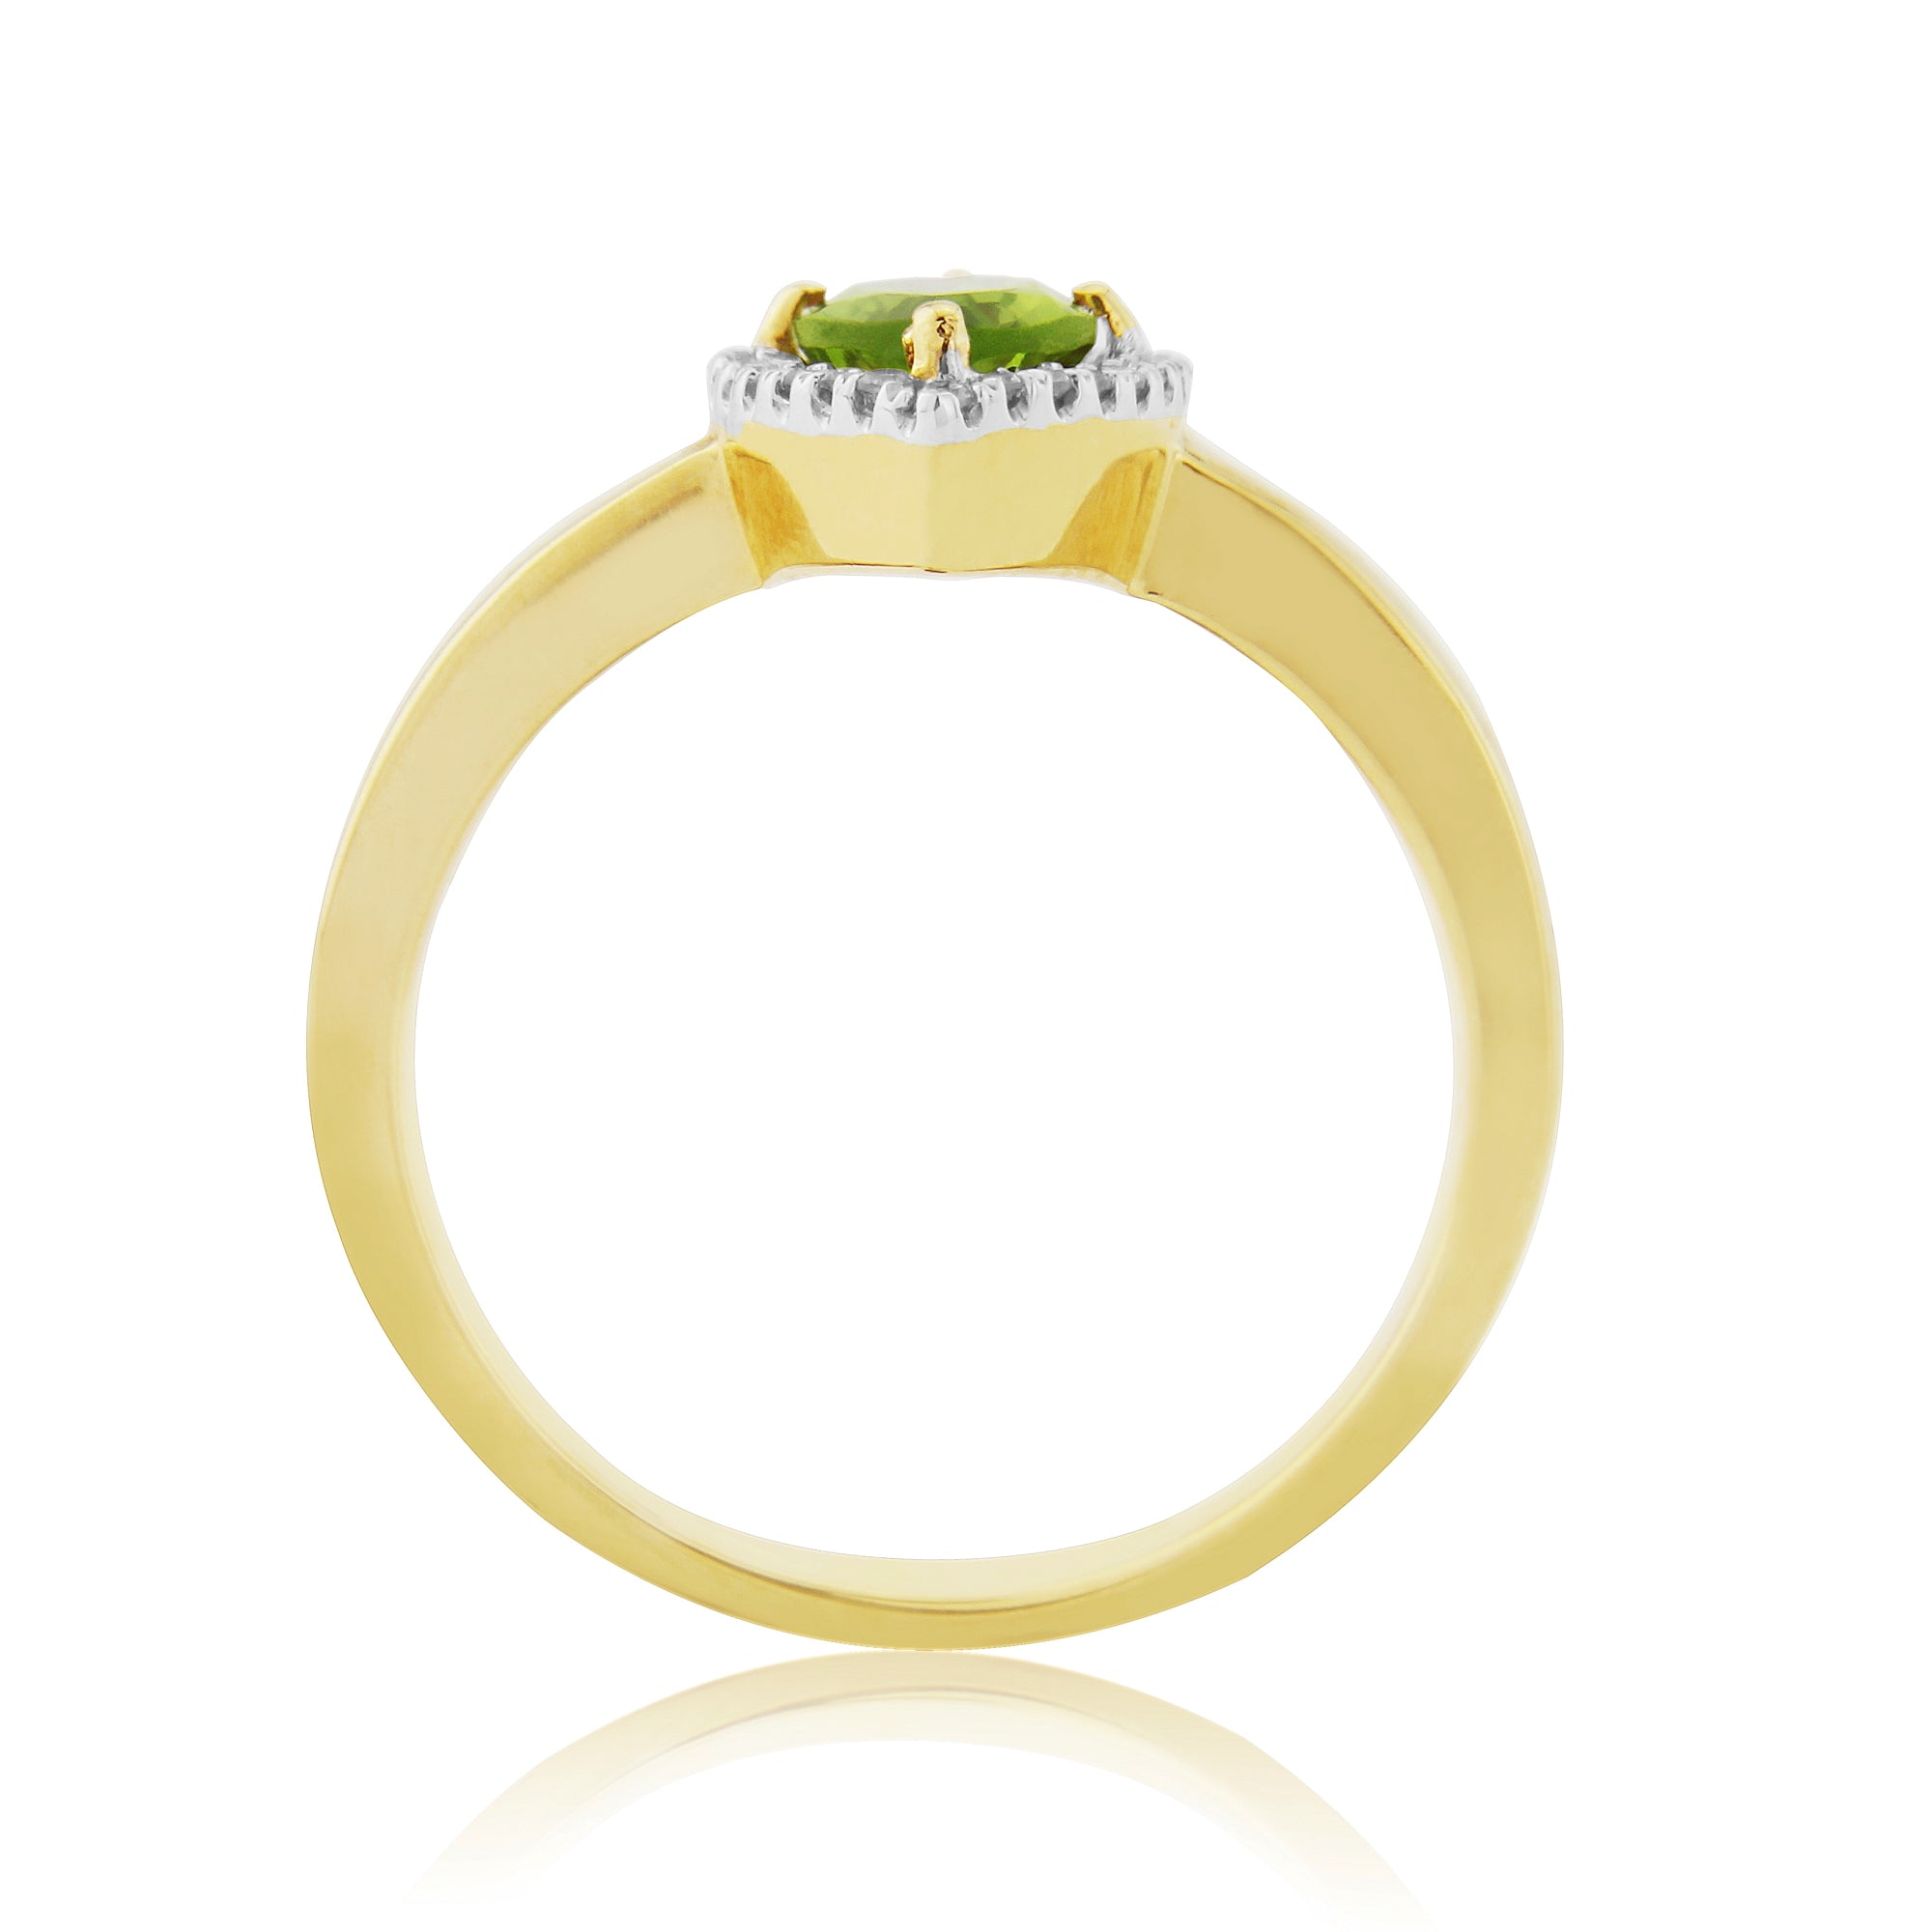 9ct gold 10x5mm marquise shape peridot & diamond cluster ring 0.11ct